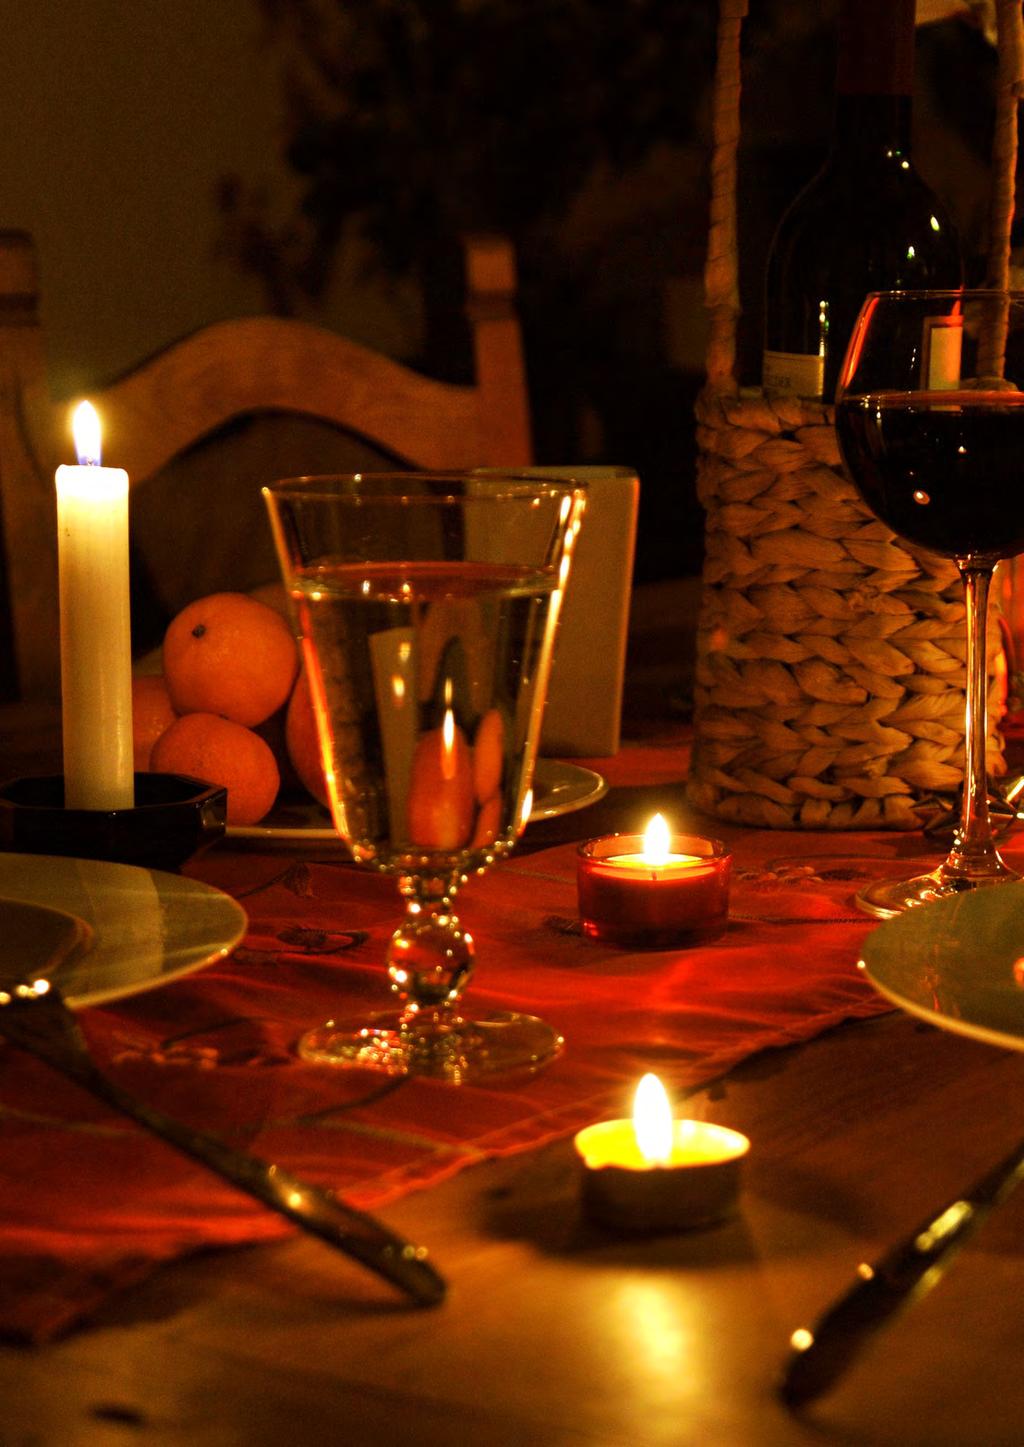 CHRISTMAS EVE CANDLELIT DINNER IN THE CROWN RESTAURANT 3 Course Menu. 22.95 per person From 6.00pm - 9.